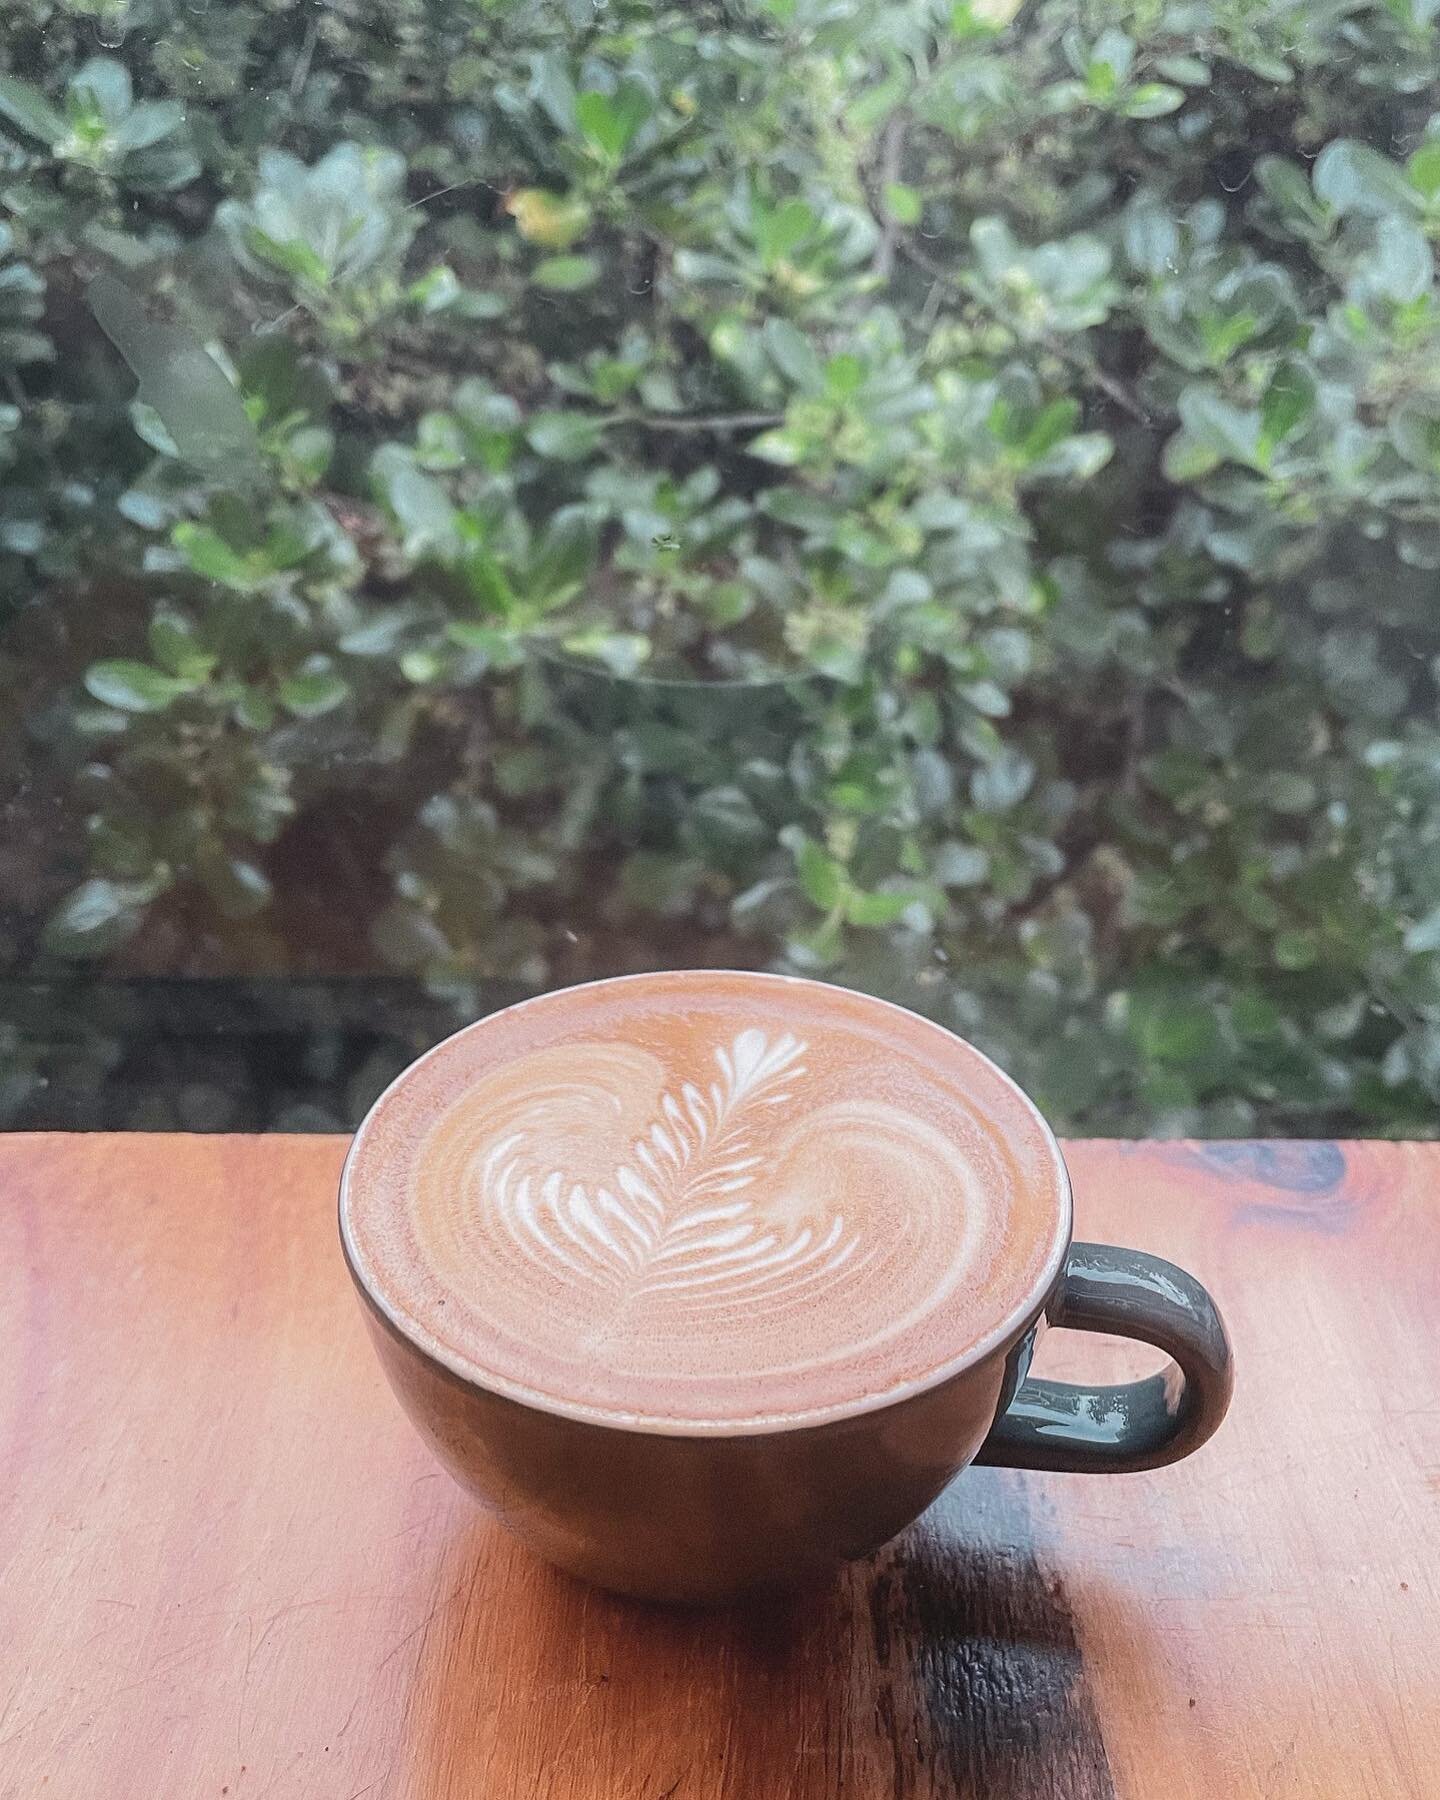 The weekend is almost here 👌

#coffeetime #bussymcbusfacecoffee #brewsonthemove #specialtycoffee #flatwhite #mtmartha #mobilecoffee #morningtonpeninsula #weekendvibes #supportlocal #commonfolkcoffee